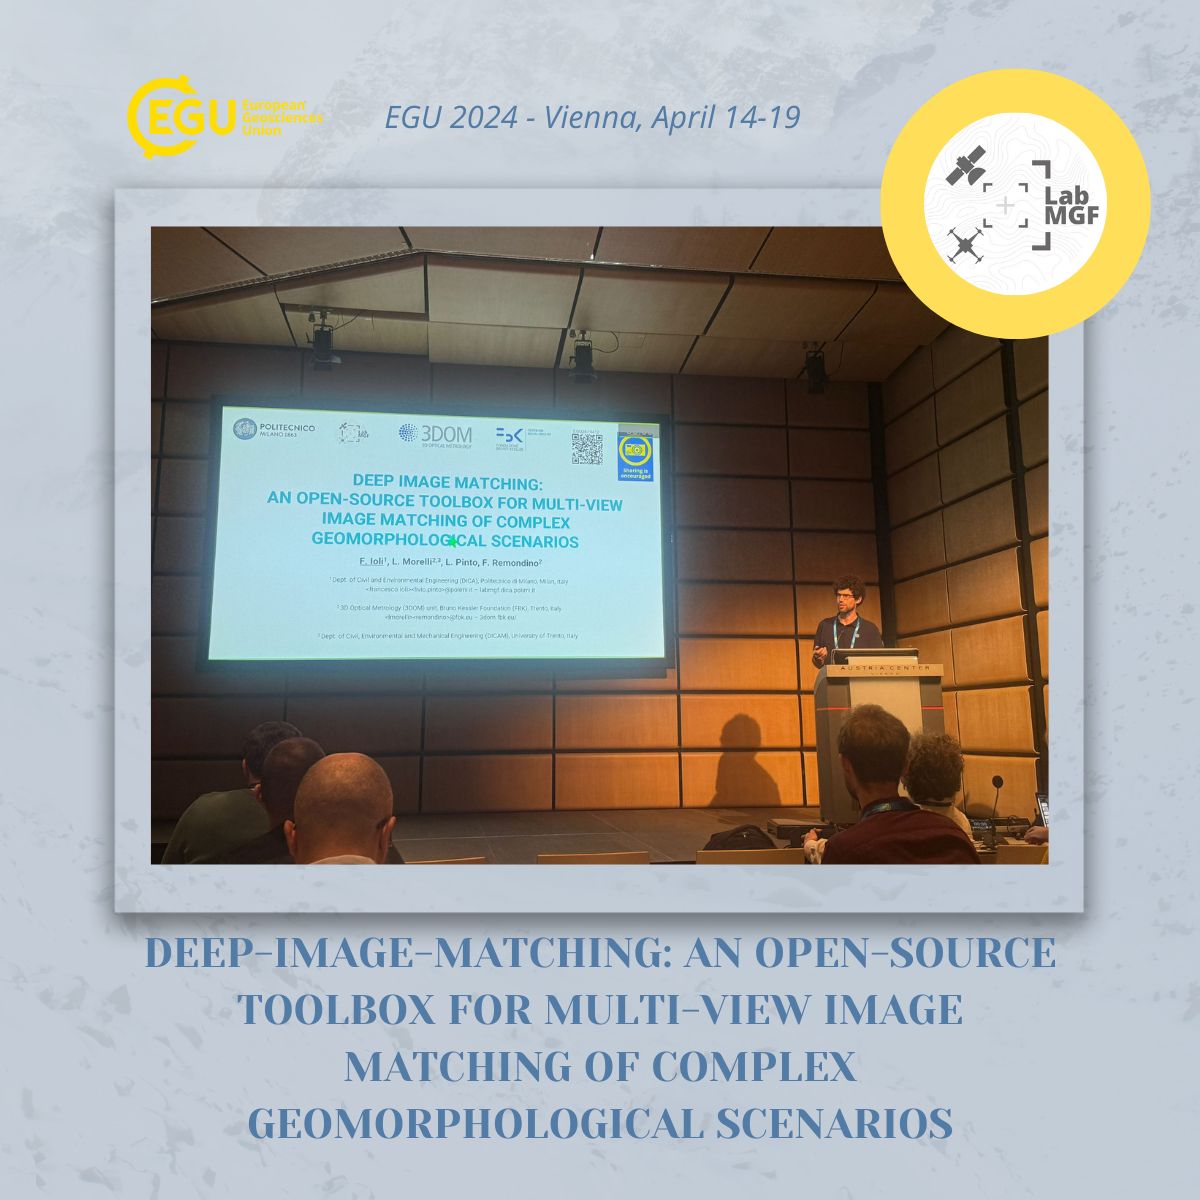 We're thrilled to share insights from a remarkable session presented by @francescoioli at #EGU2024.
With the integration of 3D imaging sensors and #ArtificialIntelligence techniques, we're unlocking new possibilities for geomorphometric analyses and process understanding.